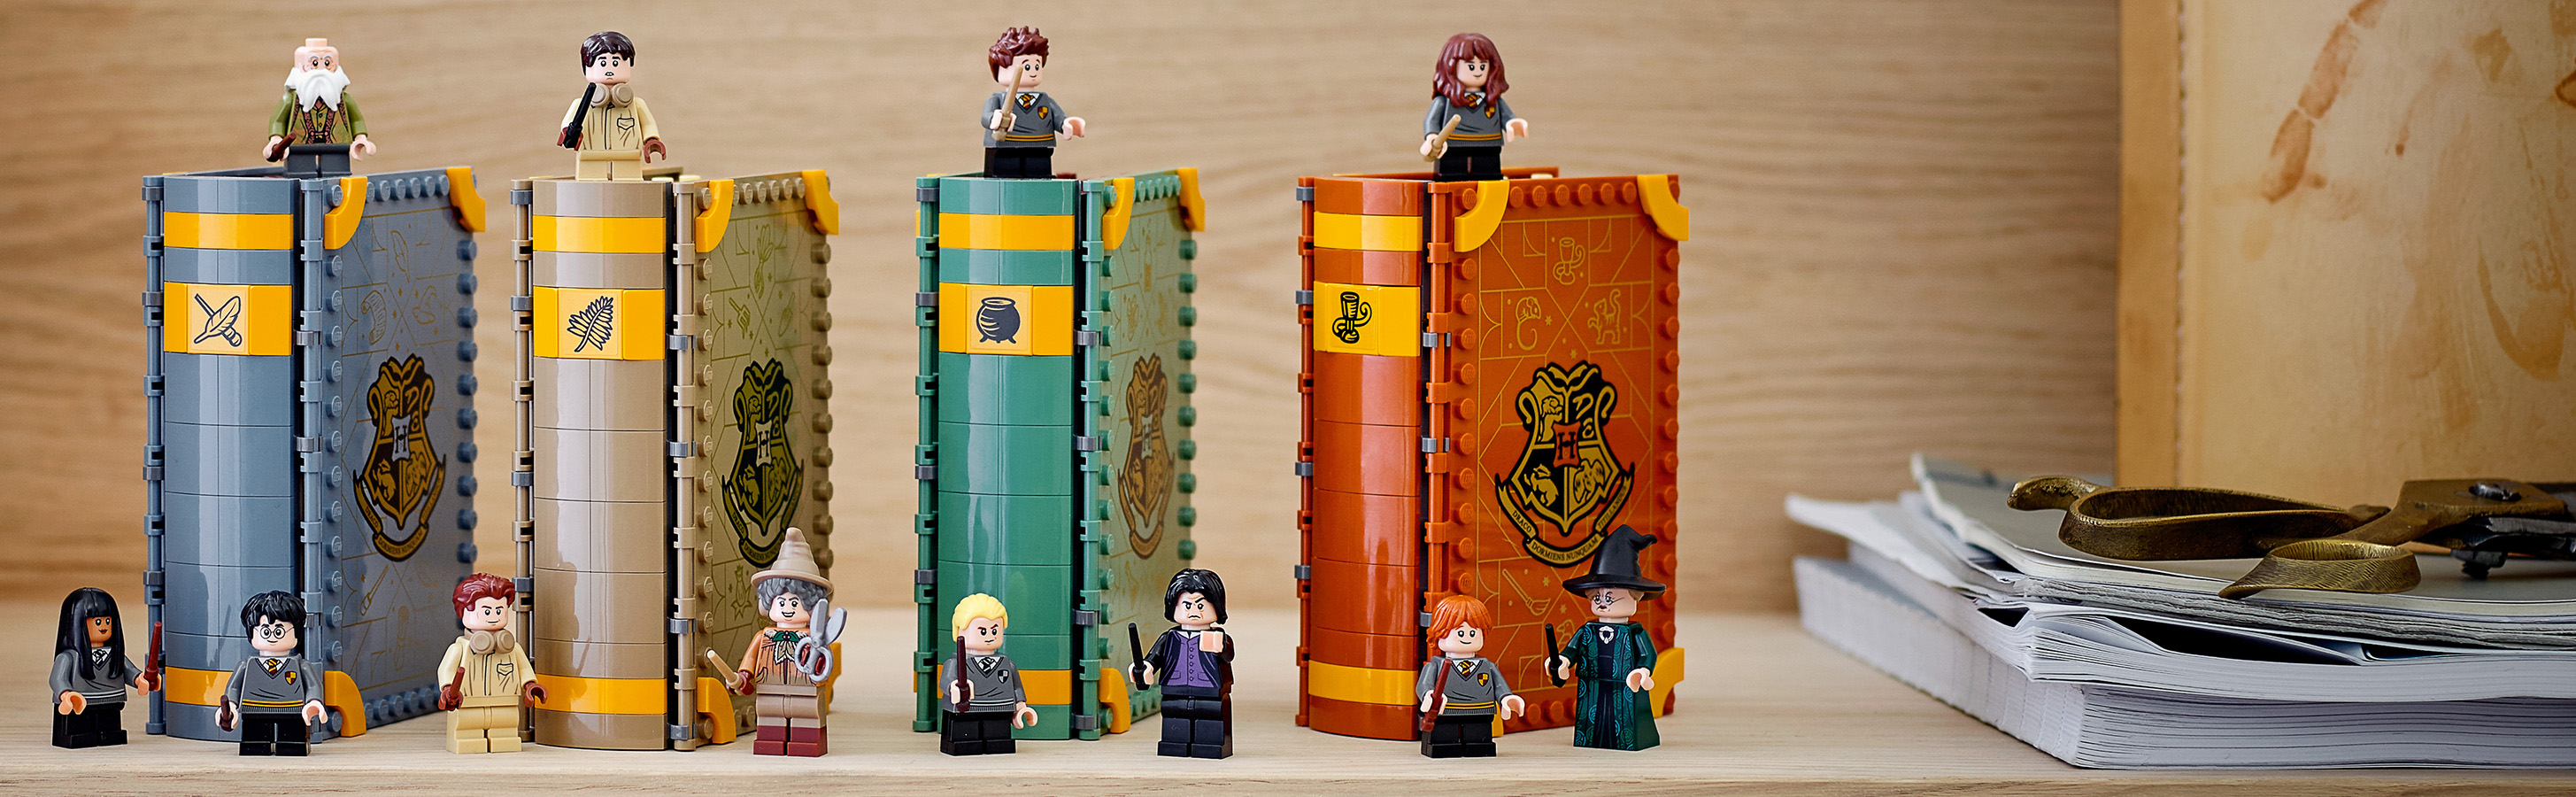 4 Hogwarts™ Moments playsets to collect